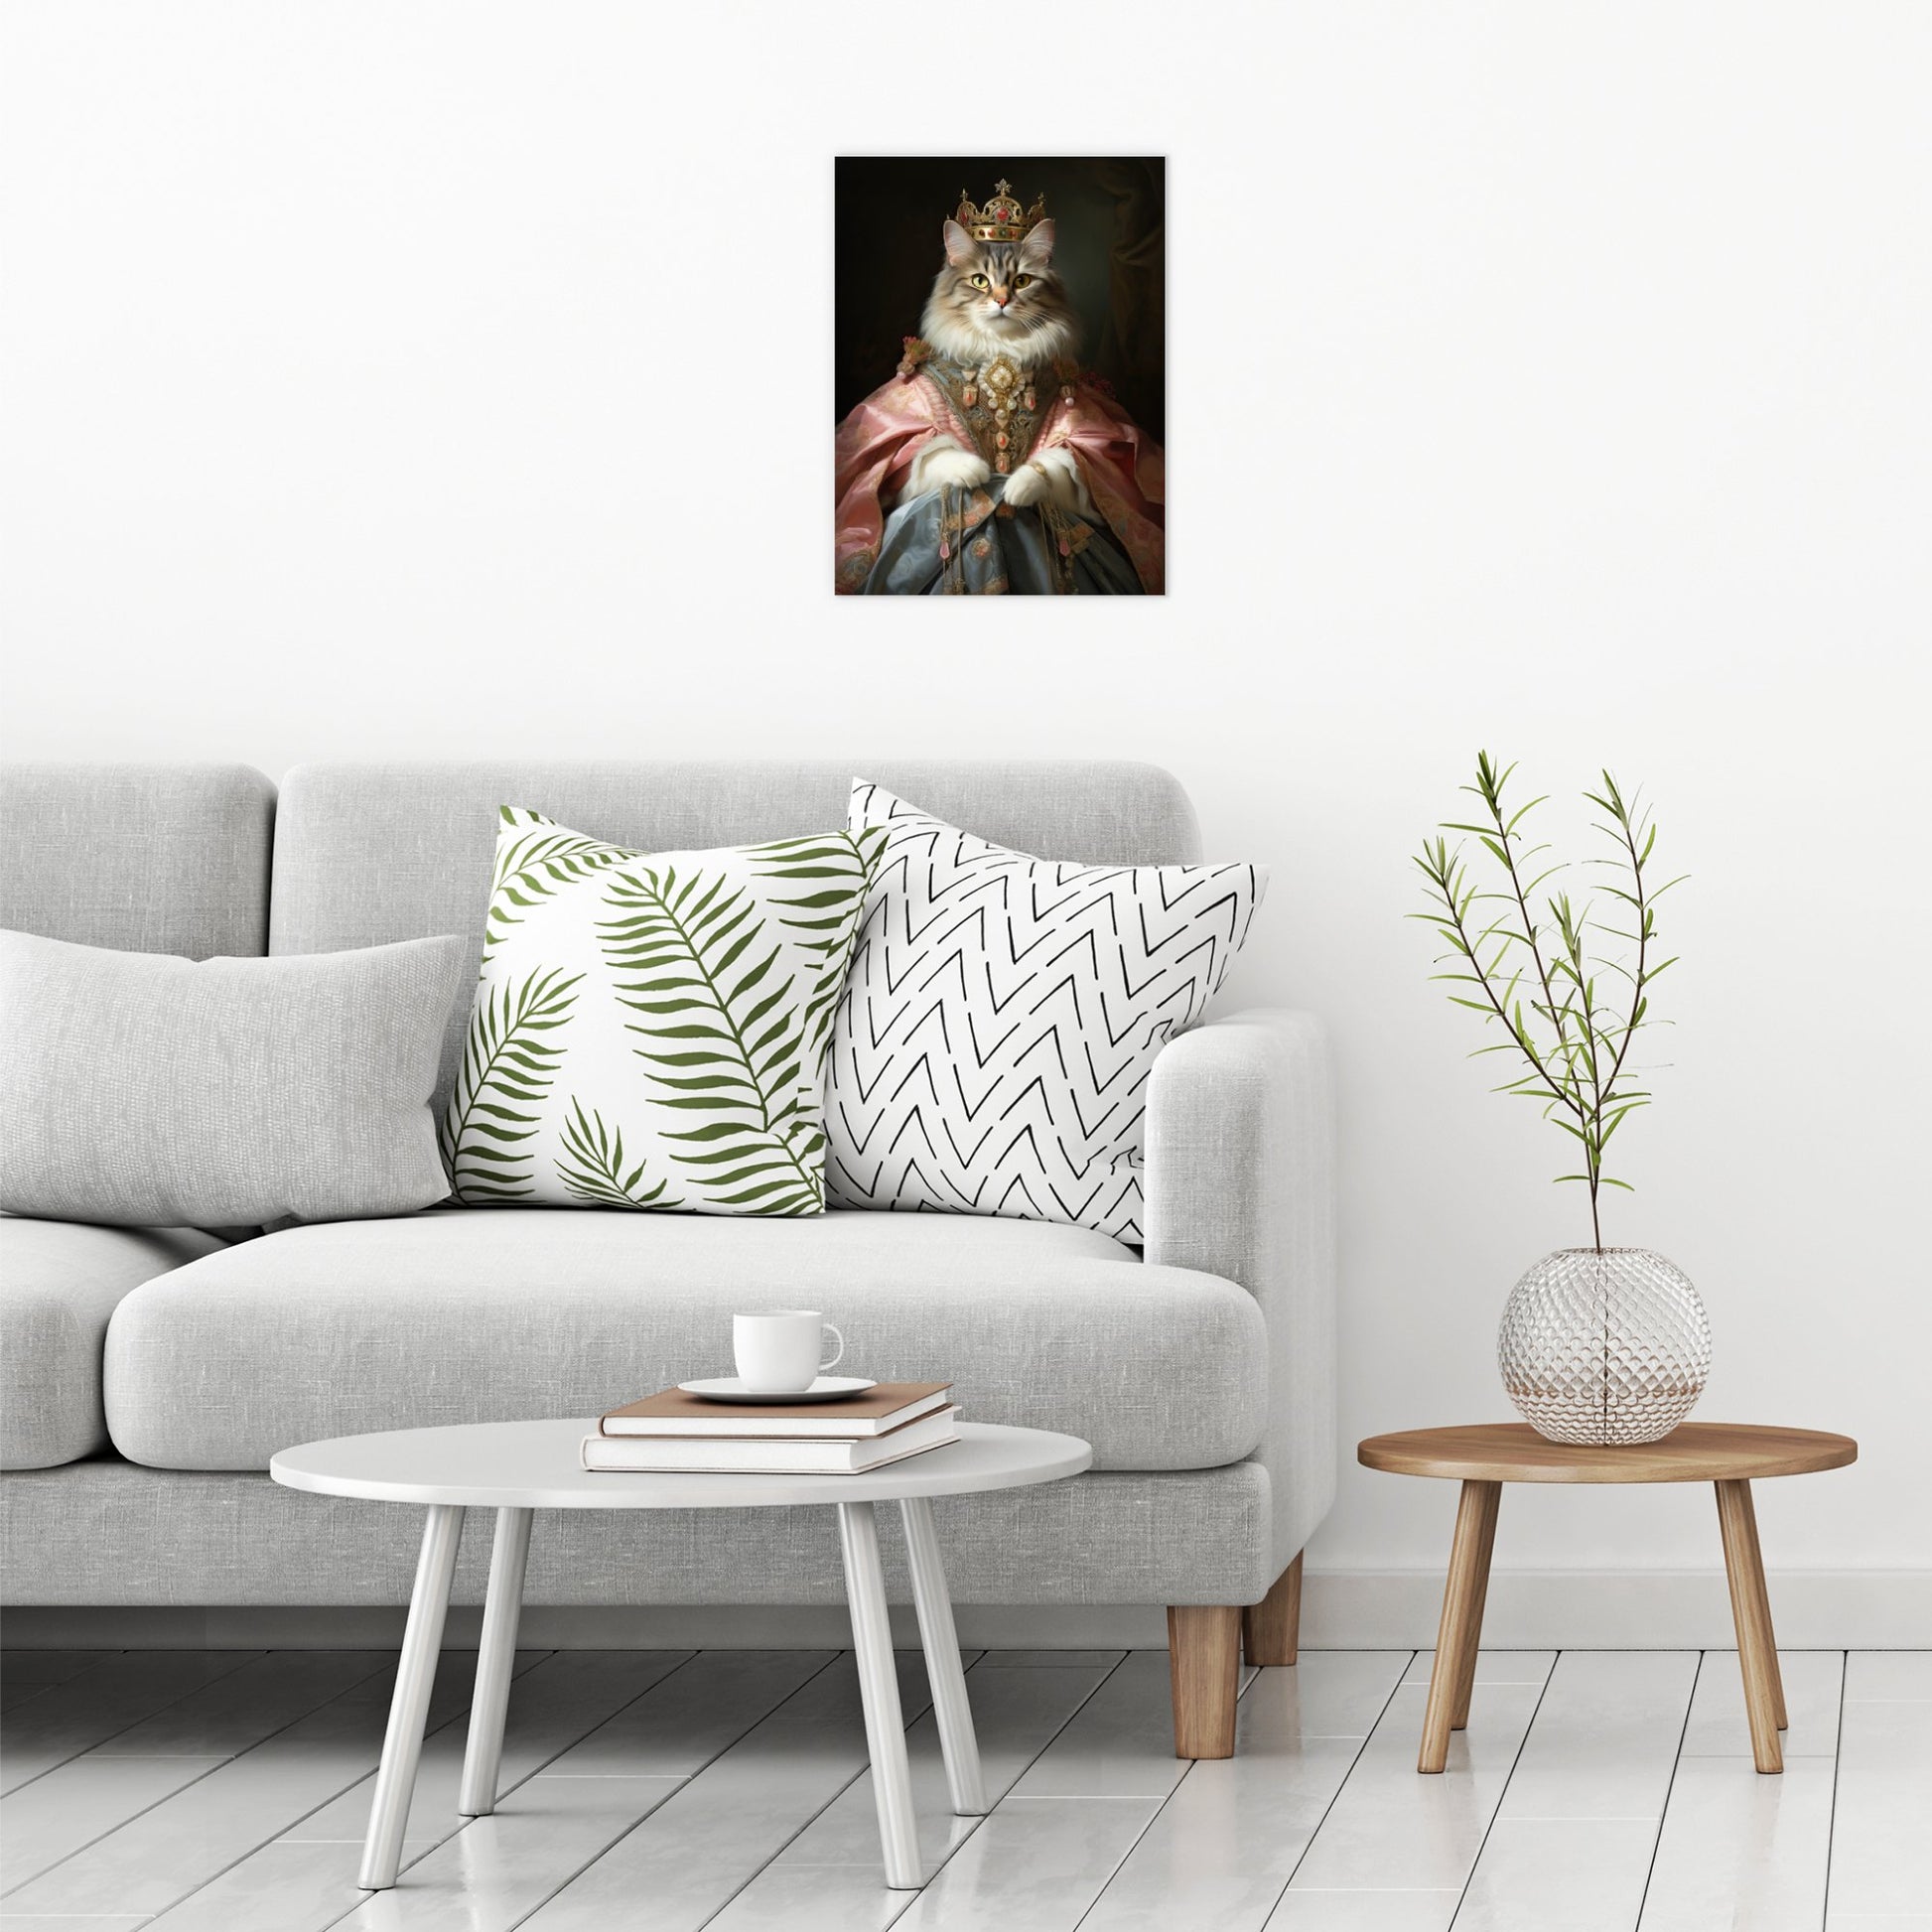 A contemporary modern room view showing a medium size metal art poster display plate with printed design of a Pet Portraits - Princess Kitty Painting